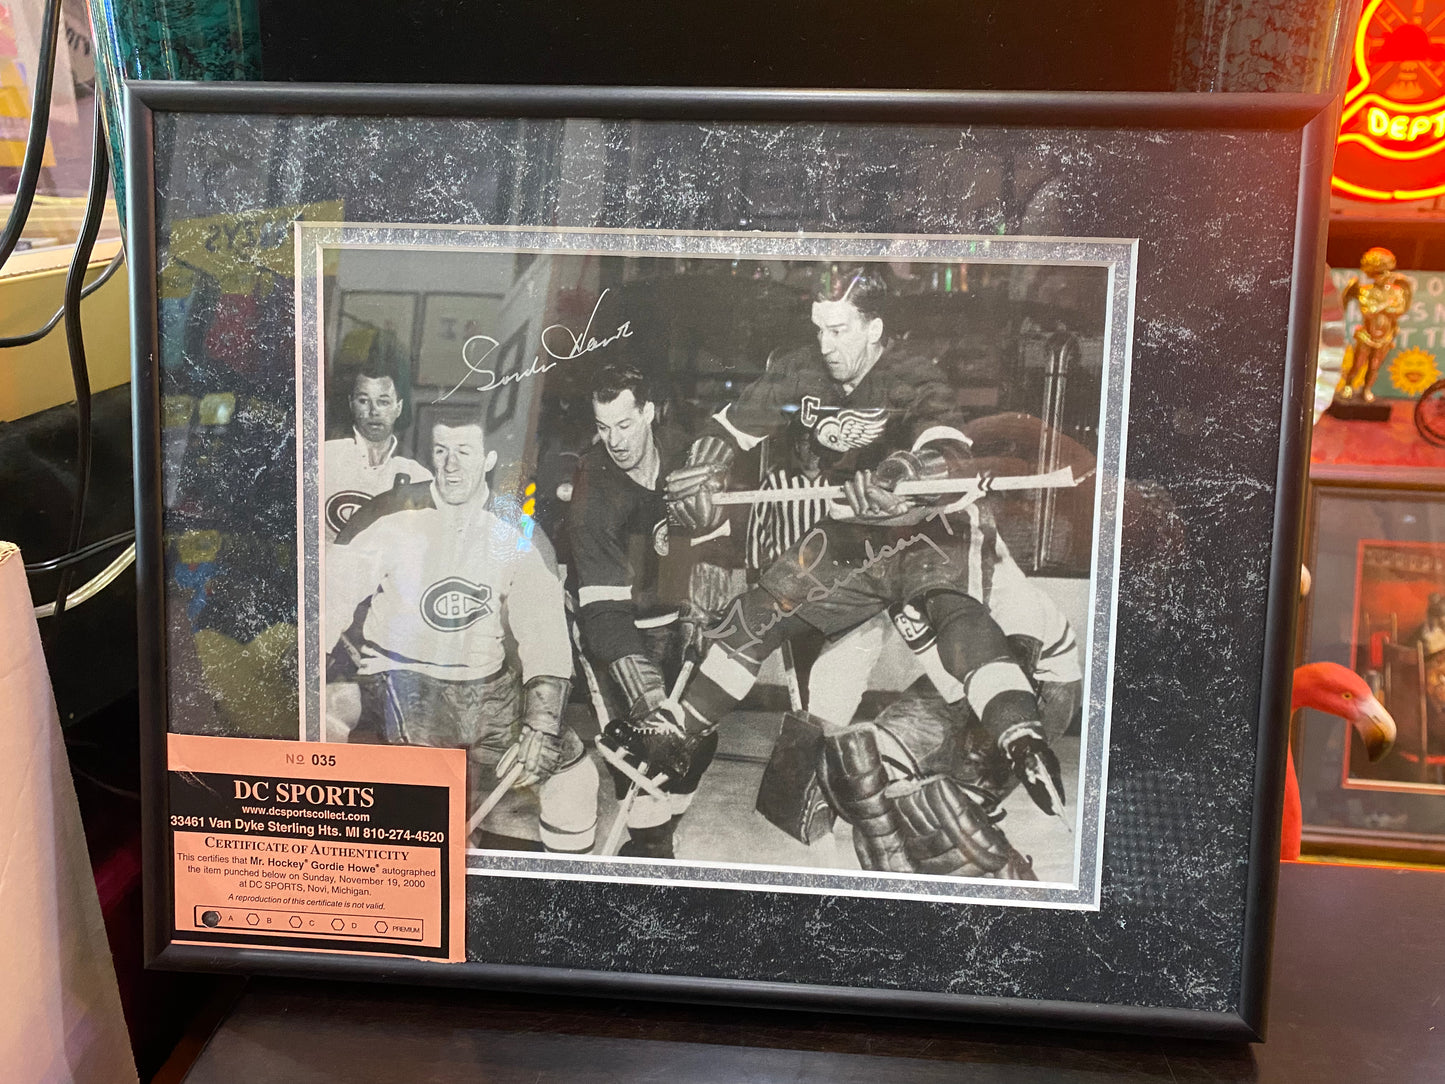 Gordie Howe and Ted Lindsay Autograph